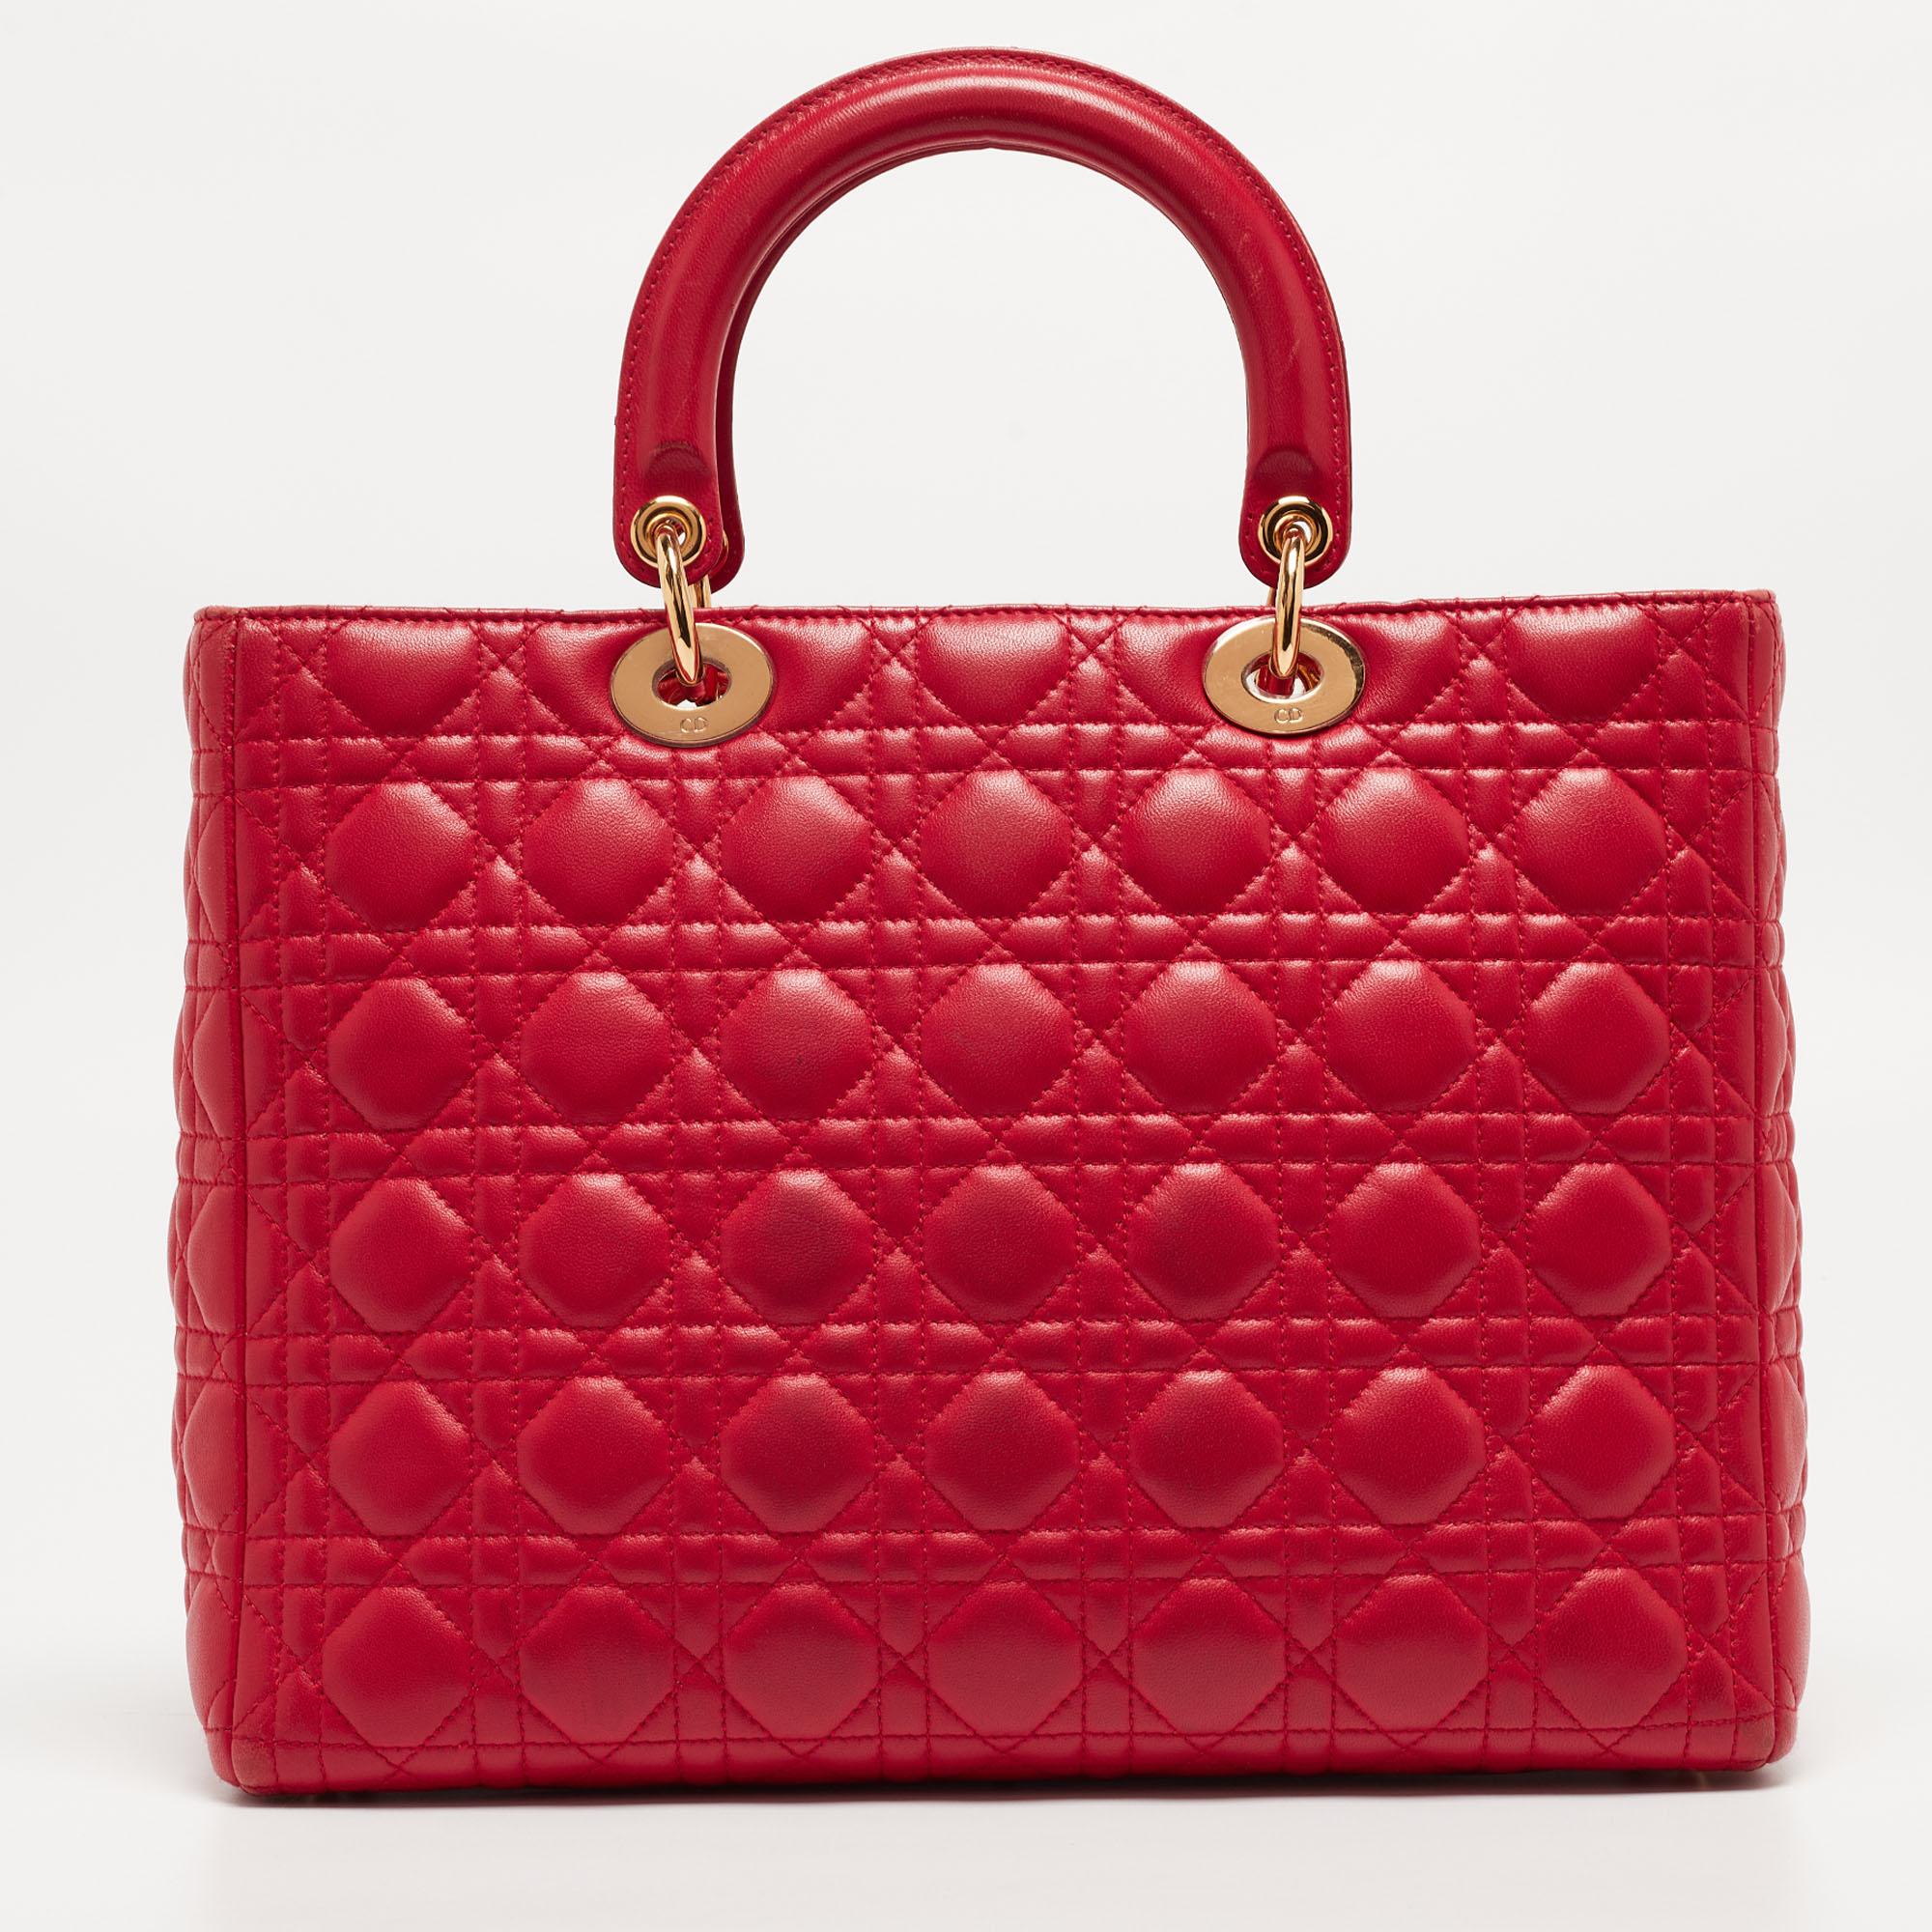 A timeless status and great design mark the Lady Dior tote. It is an iconic bag that people continue to invest in to this day. We have here this classic beauty crafted from red Cannage leather. The bag is complete with gold-tone hardware.

Includes: